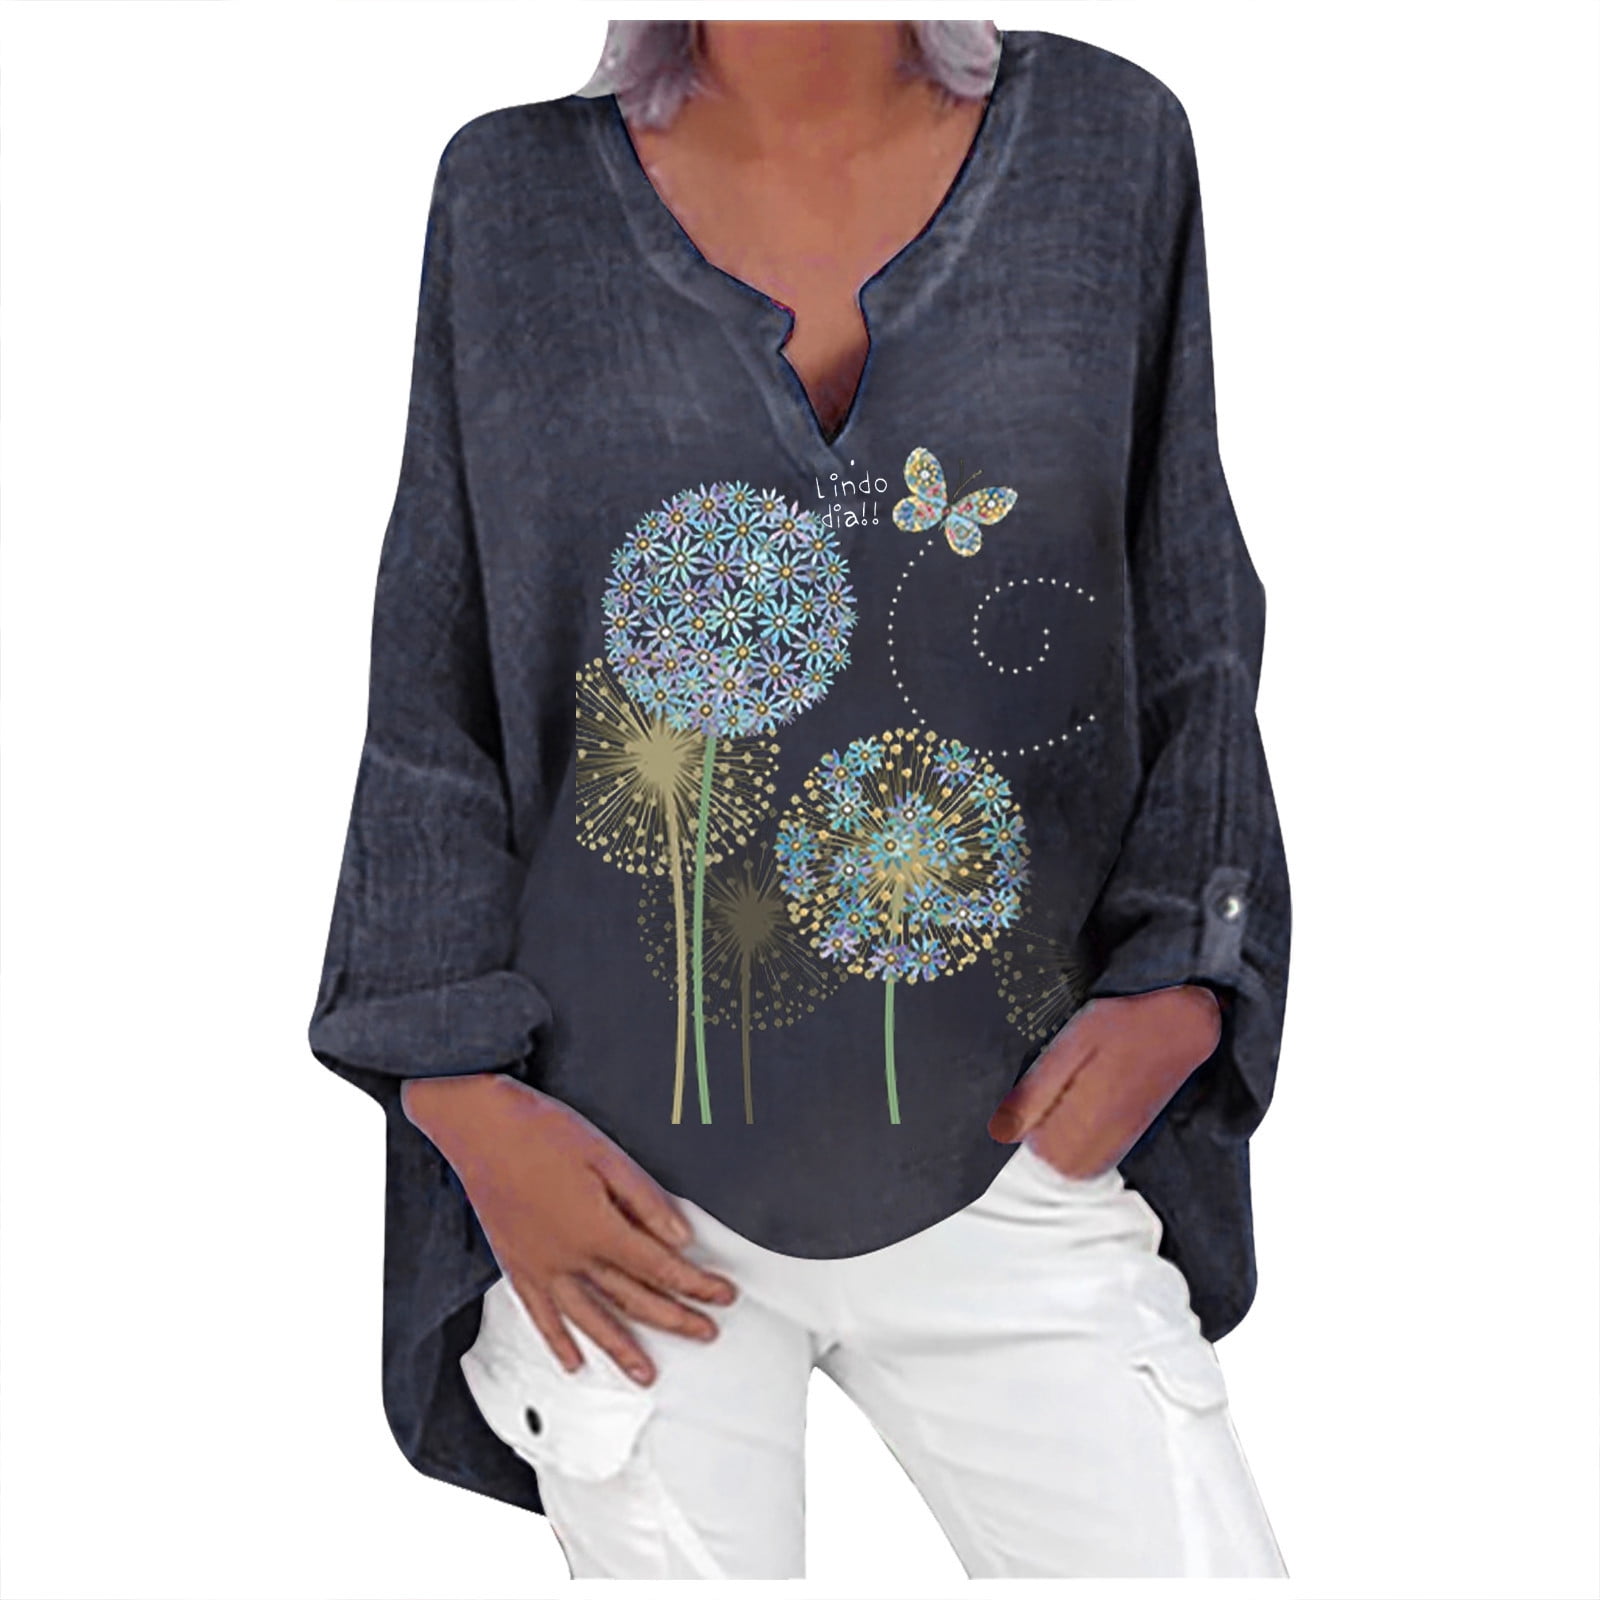 Plus Size Womens V Neck Long Sleeve Floral Loose Tops Casual Tee Shirt Blouse 